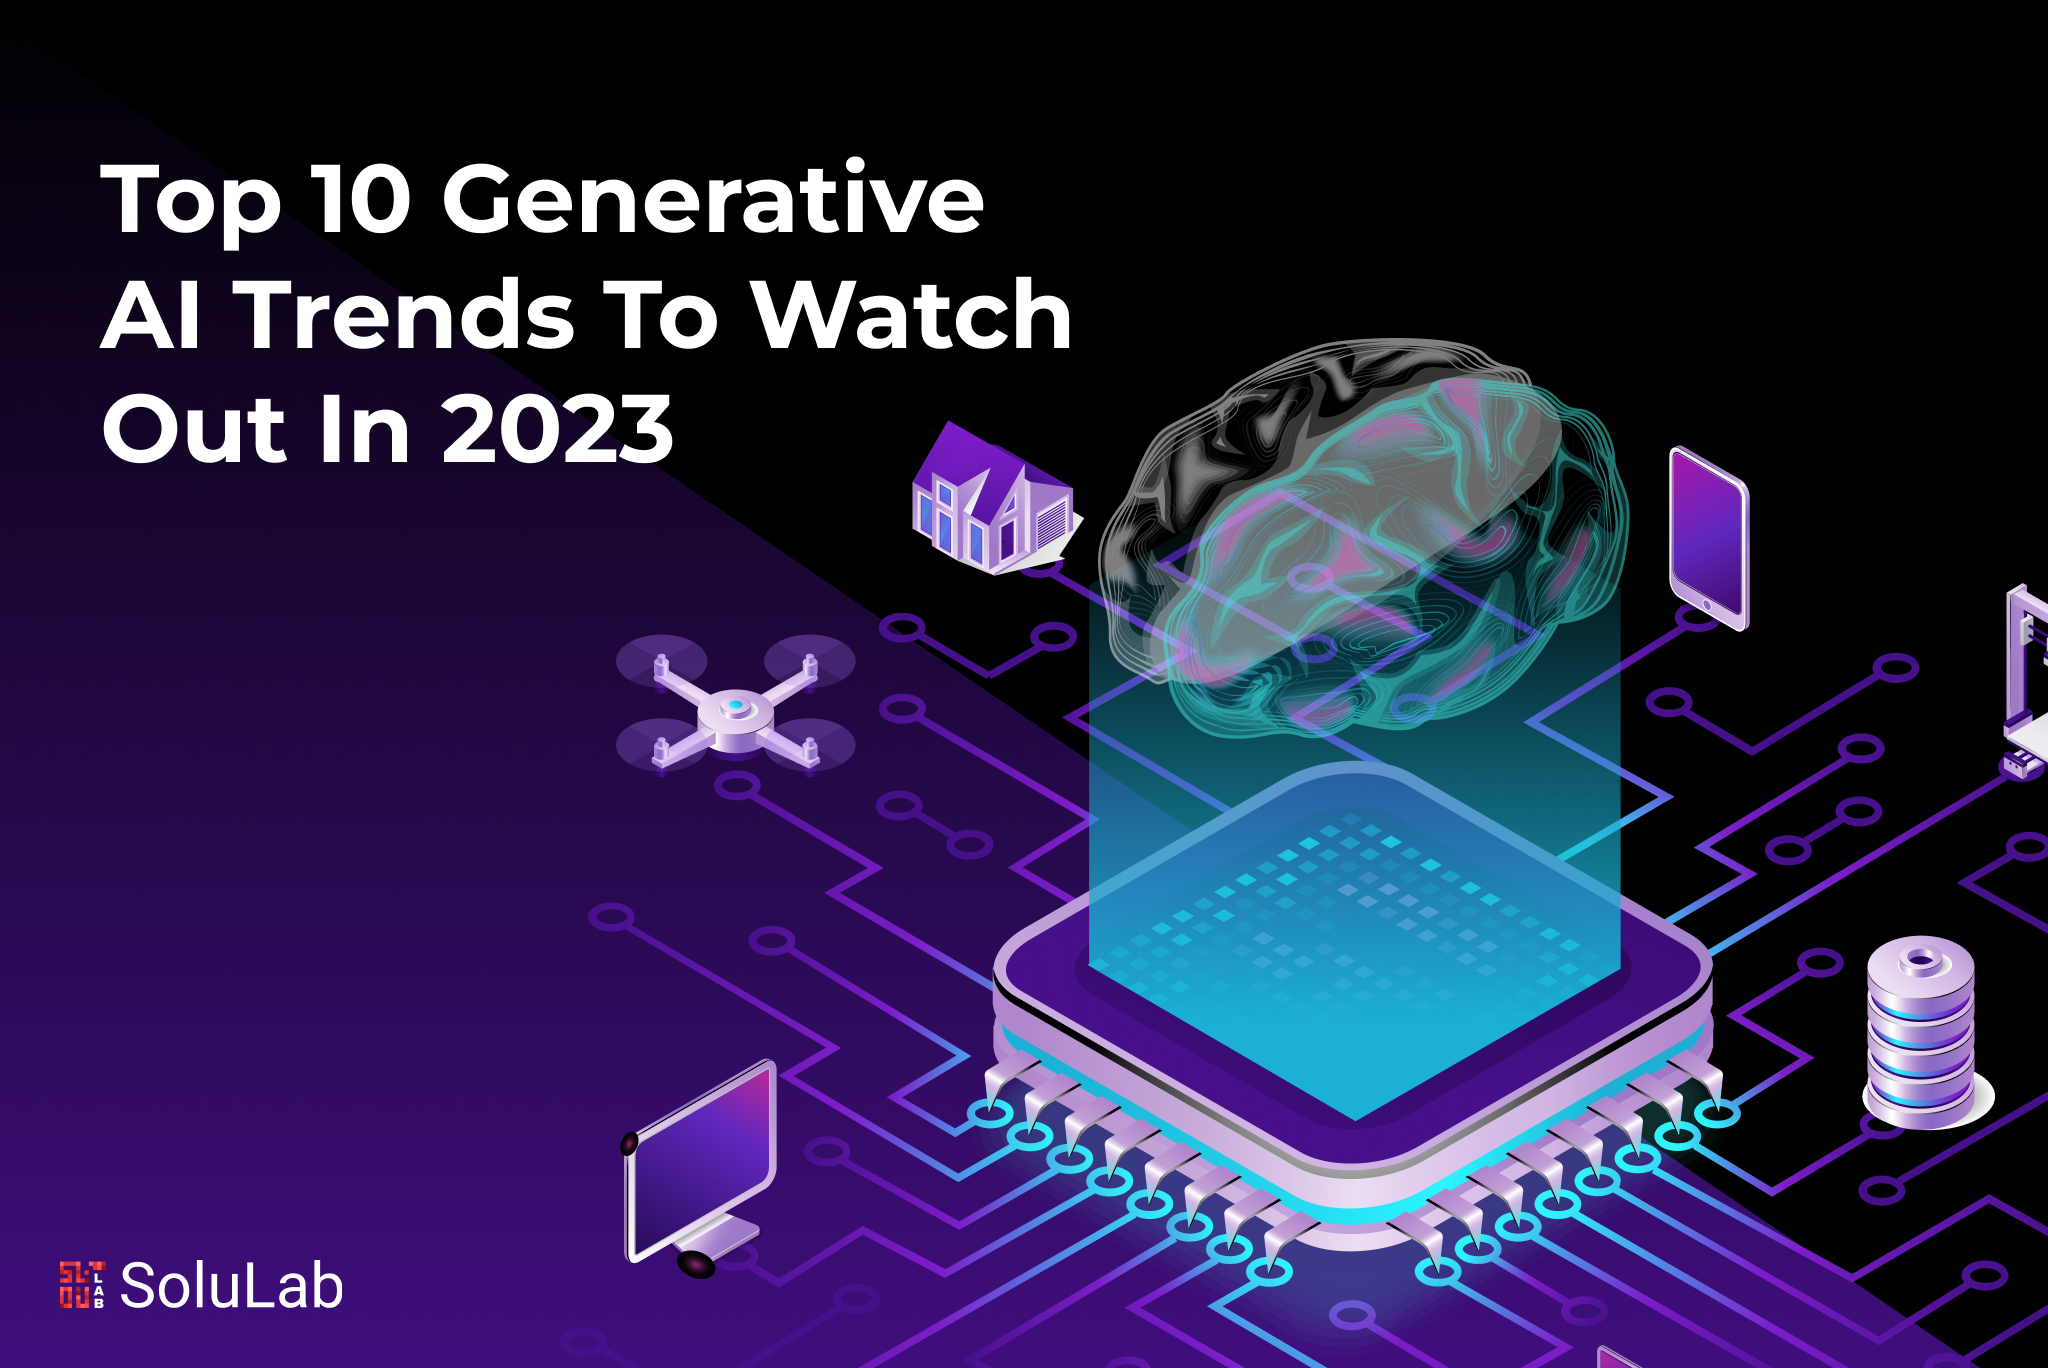 Top 10 Generative AI Trends To Watch Out In 2023